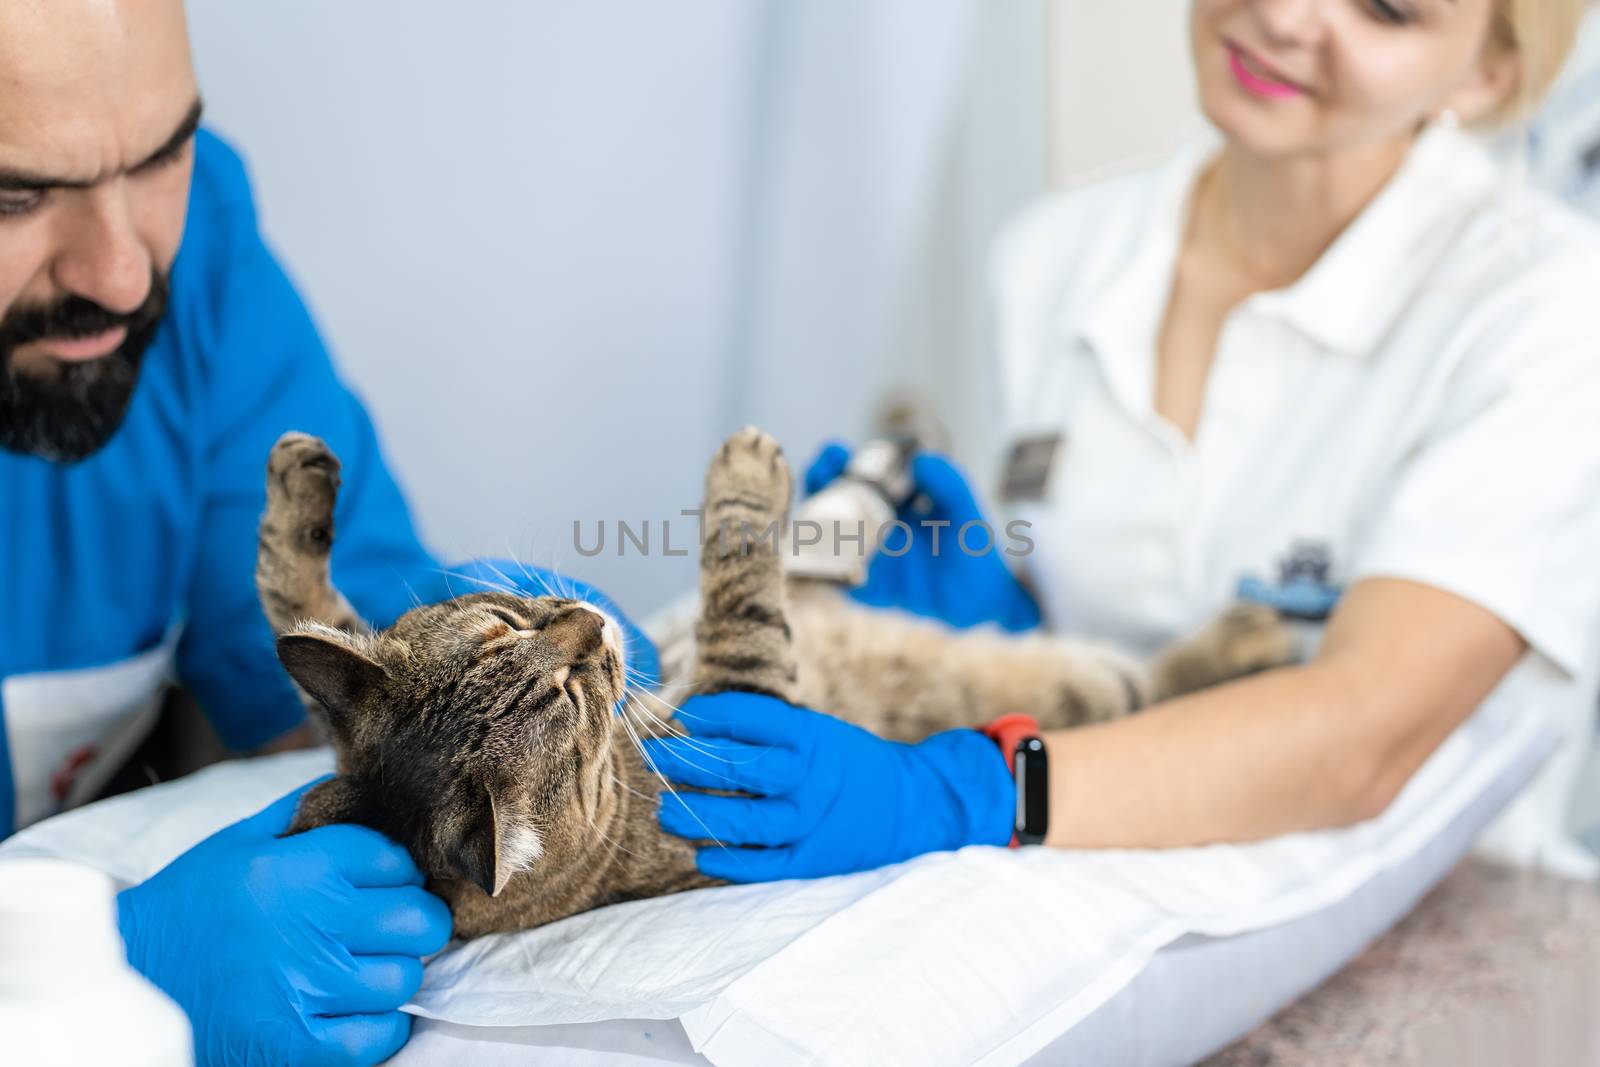 Professional doctors veterinarians perform ultrasound examination of the internal organs of a cat in a veterinary clinic.